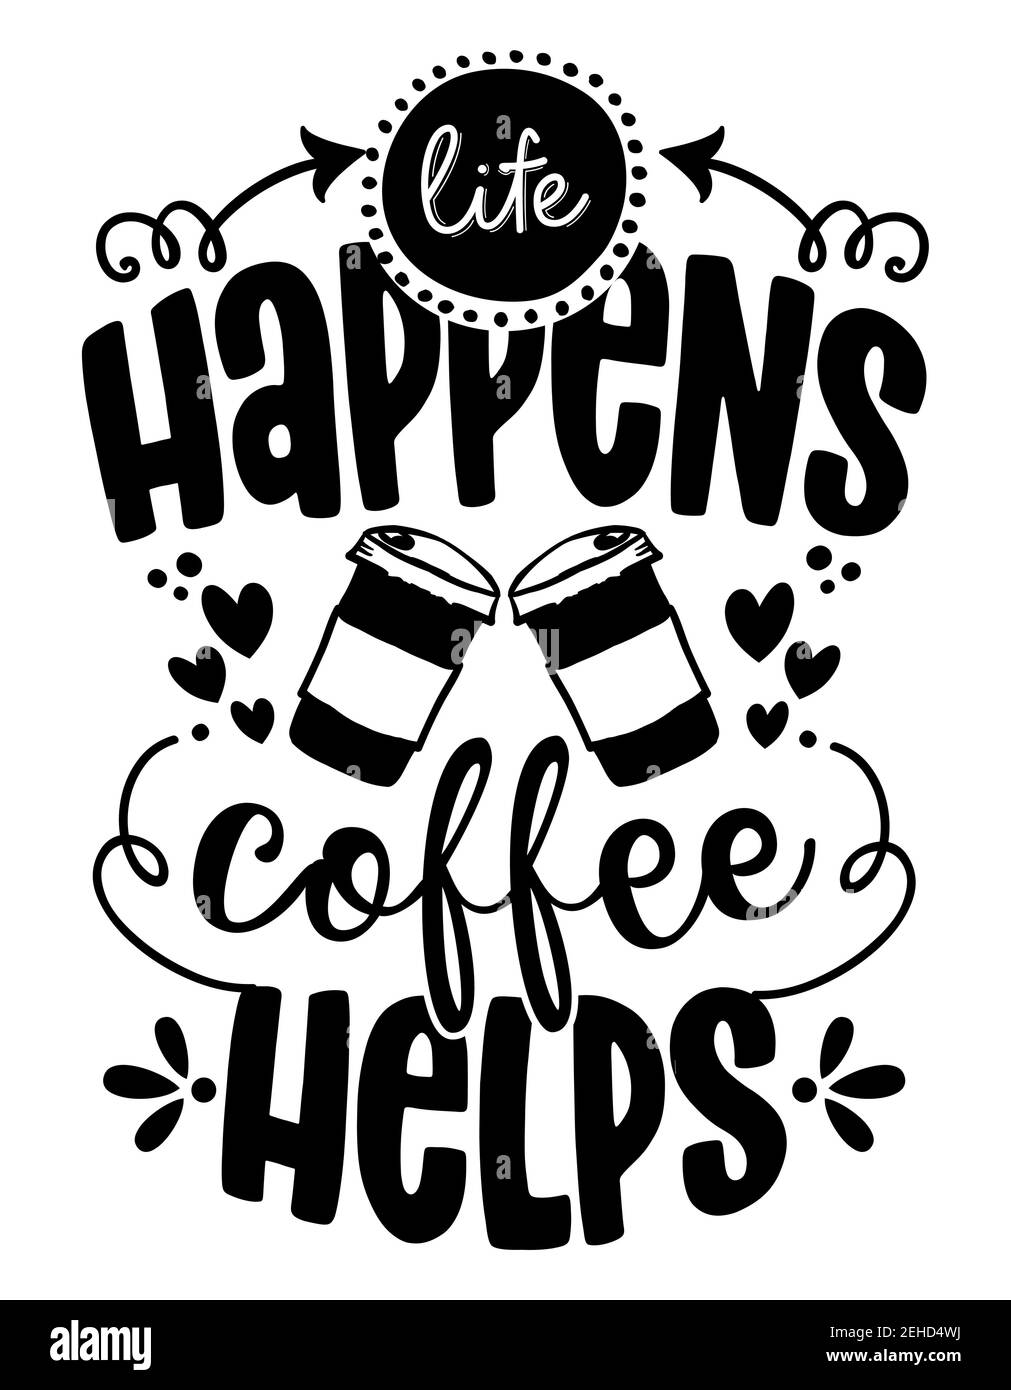 Image pen helps Hand happens, coffee painted Coffee cards, isolated for or - wall - t-shirts, Vector shop Art design calligraphy decoration. Stock restaurant modern Alamy & brush Life